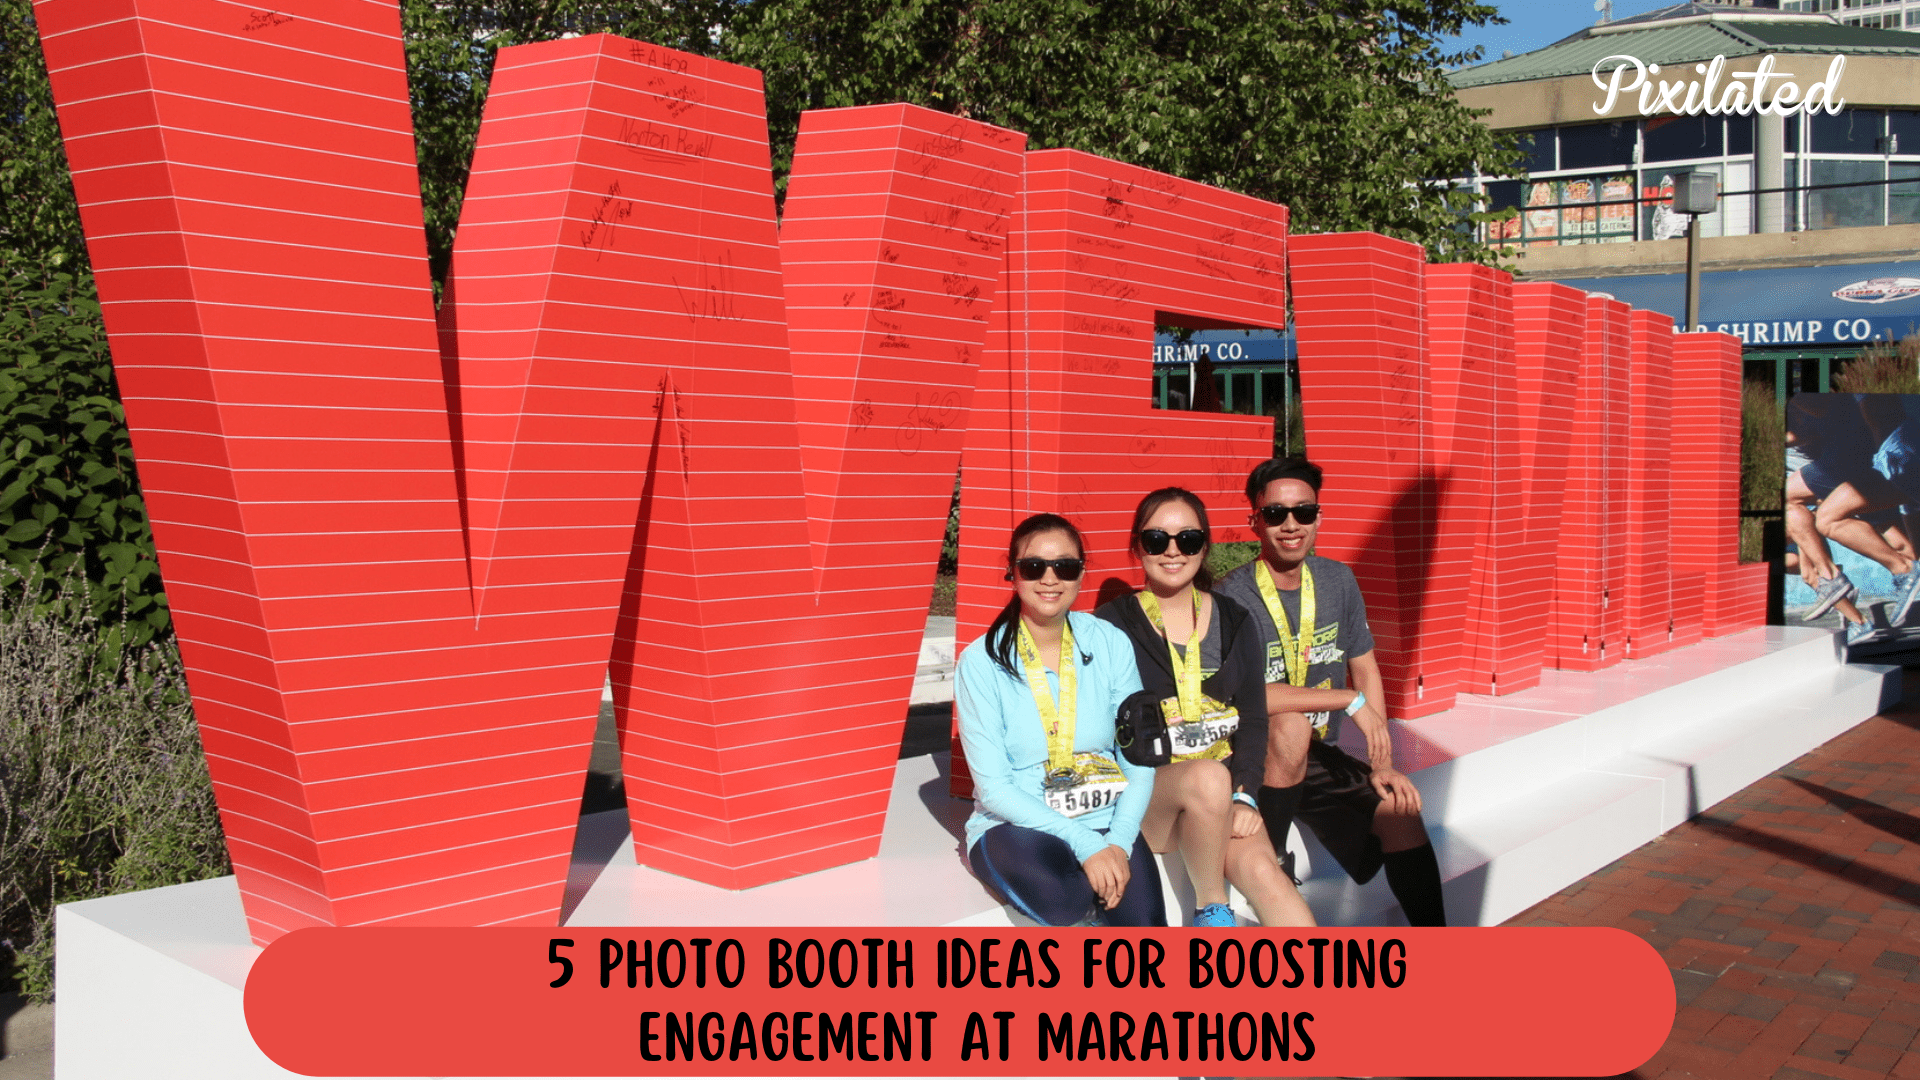 5-photo-booth-ideas-for-boosting-engagement-at-marathons-pixilated